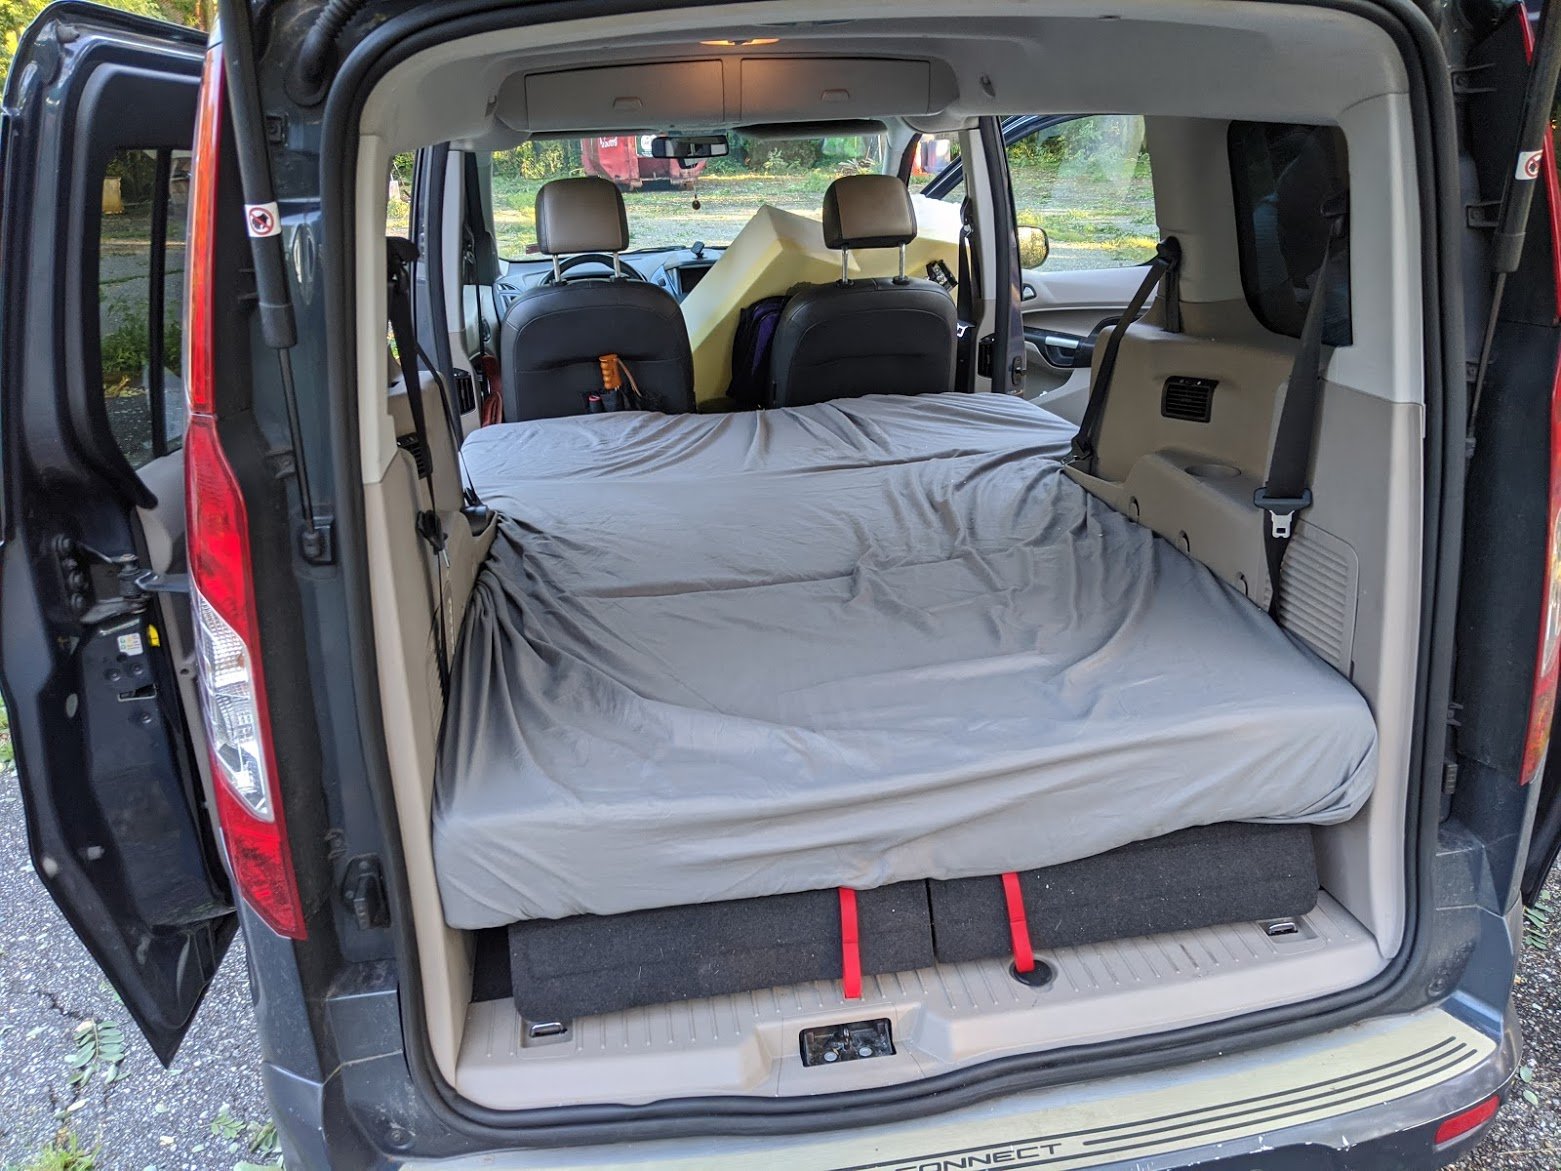 Simple bed - Accessories and Modifications - Ford Transit Connect Forum